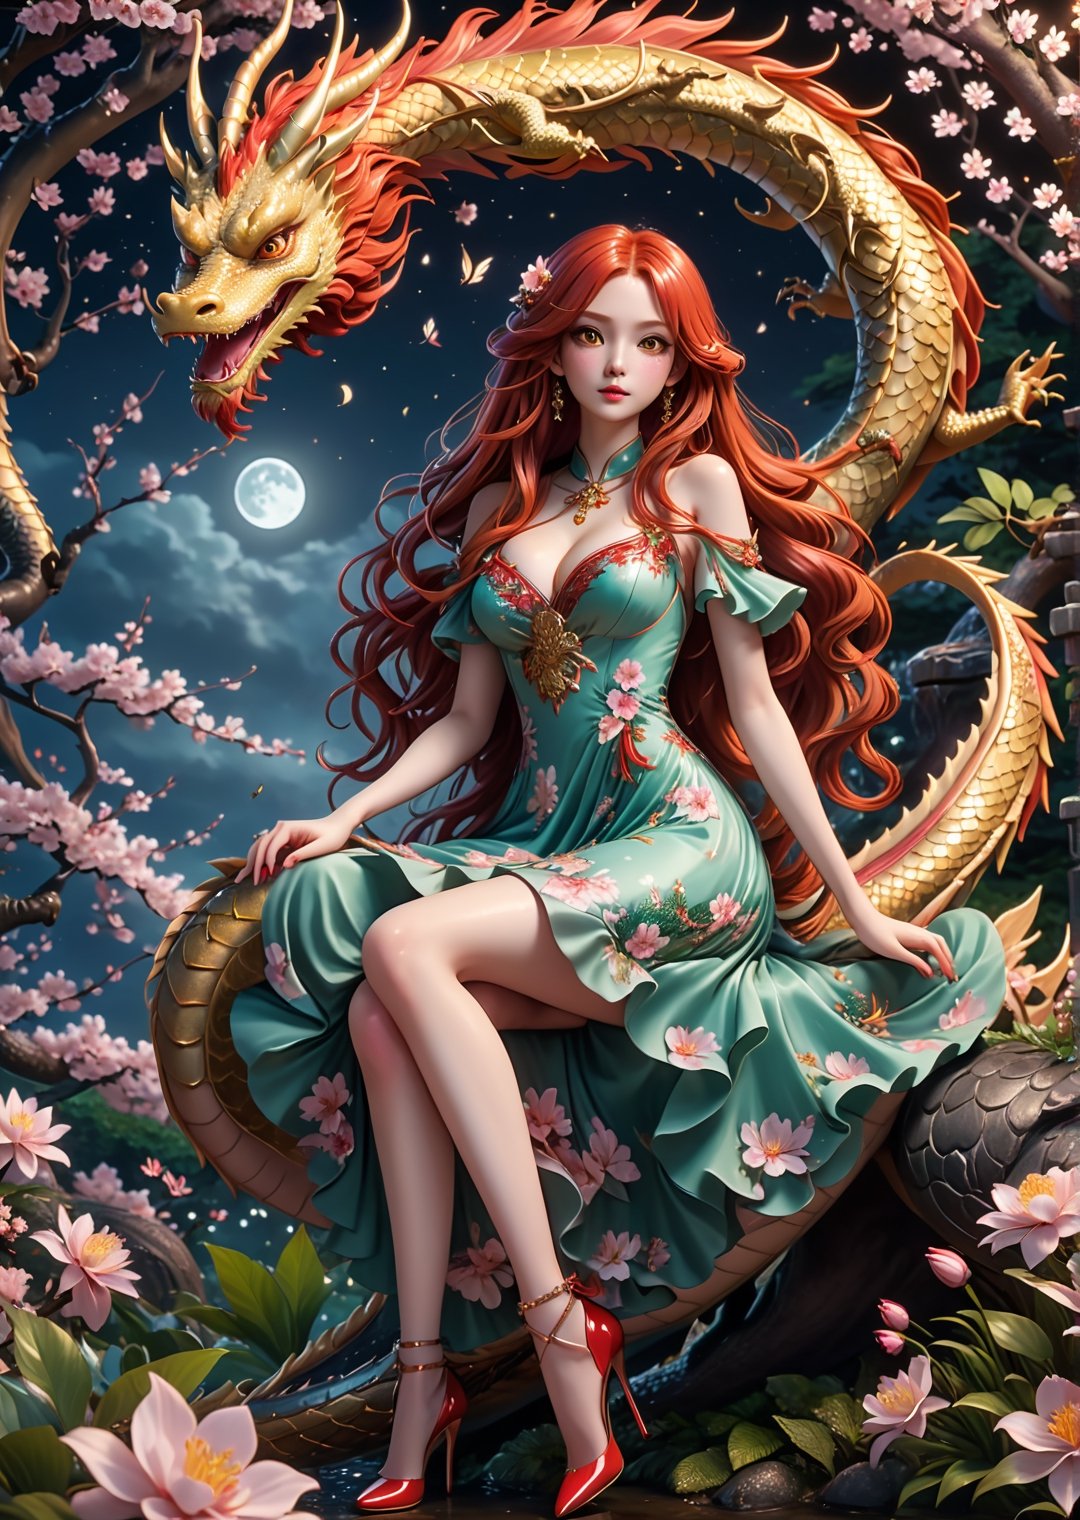 4K, ultra detailed, photorealistic, 1 girl with long red hair wearing a floral dress, Stilettos high heels, large breasts and detail eyes looking at viewers, dynamic sitting poses, dragon in the background, more detail XL, SFW, garden with Sakura flowers, windy, nighttime, moonlight, 